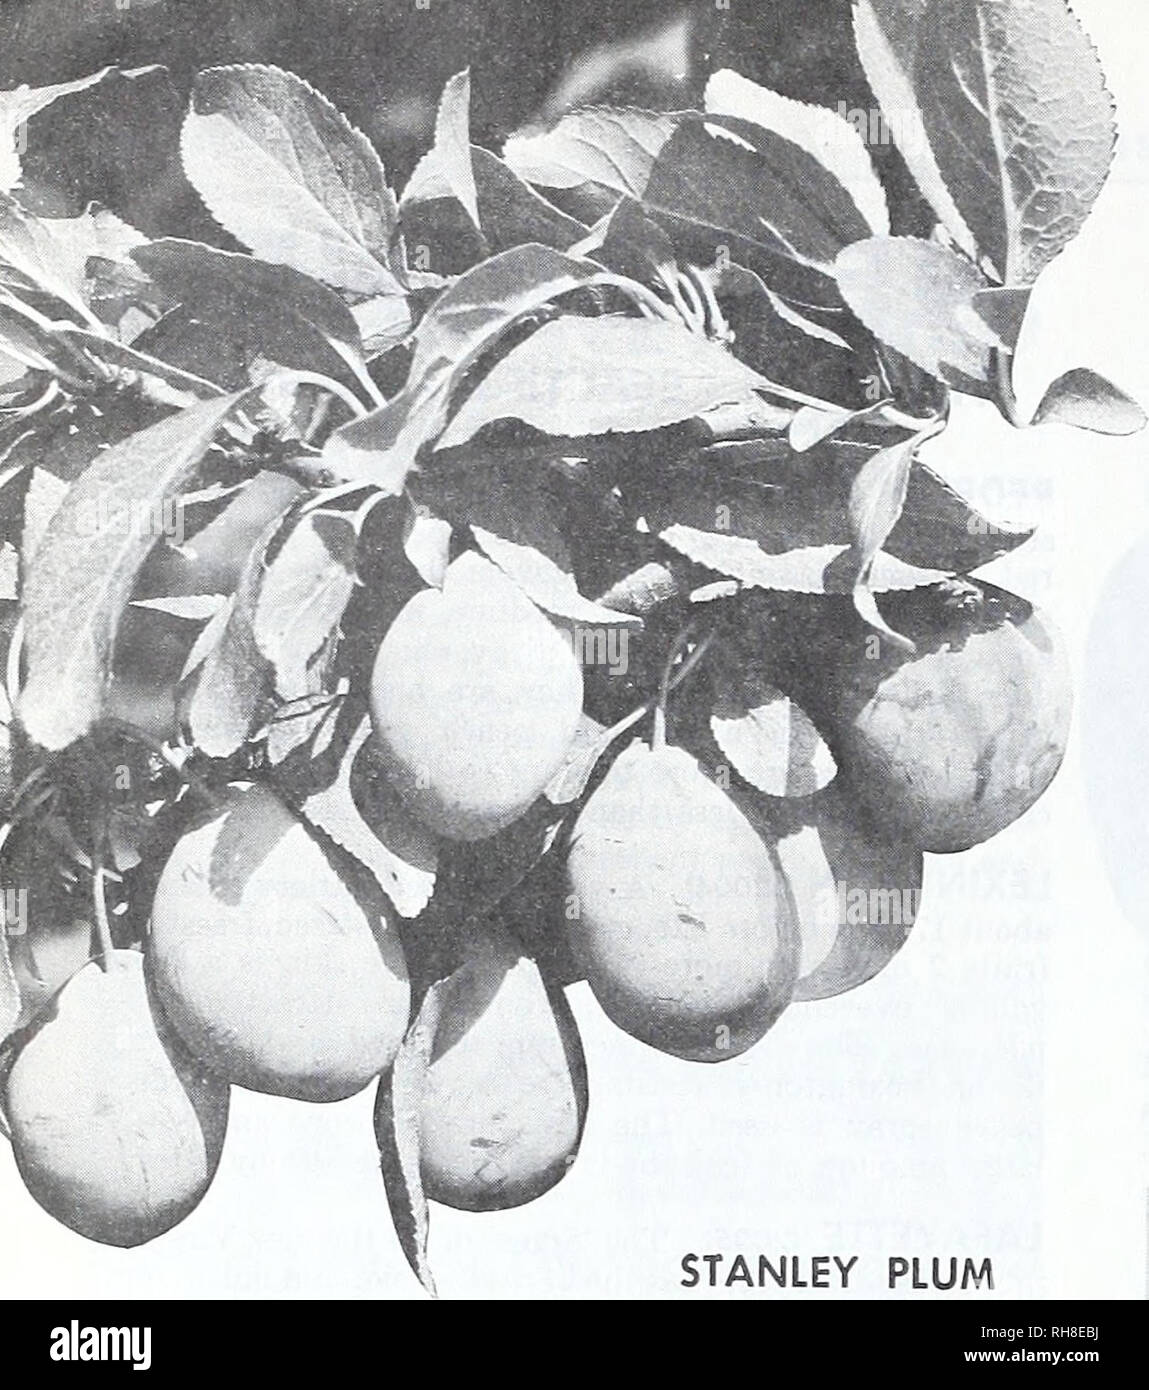 . Bountiful Ridge Nurseries : 1974 - 1975 retail and commercial growers price list. Nurseries (Horticulture) Catalogs; Fruit Catalogs; Fruit trees Catalogs; Trees Catalogs; Flowers Catalogs. STANLEY PLUM PLUMS OUR PLUM VARIETY LISTINGS HAVE BEEN CAREFULLY SELECTED TO SUPPLY A VARIETY FOR EVERY SECTION AND PURPOSE ALWAYS ORDER BY CATALOG NUMBER AND VARIETY NAME PRICES FOR ALL PLUM AND APRICOT VARIETIES For Larger Quantities, See Commercial Growers Price List in Center Fold 3-9 10-49 Each each each 5-6', &quot;A6&quot; up $6.50 $5.95 $4.95 4-5', Vb-n/W 6.25 5.60 4.65 3-4', Vh-Vk&quot; 5.95 5.25 Stock Photo